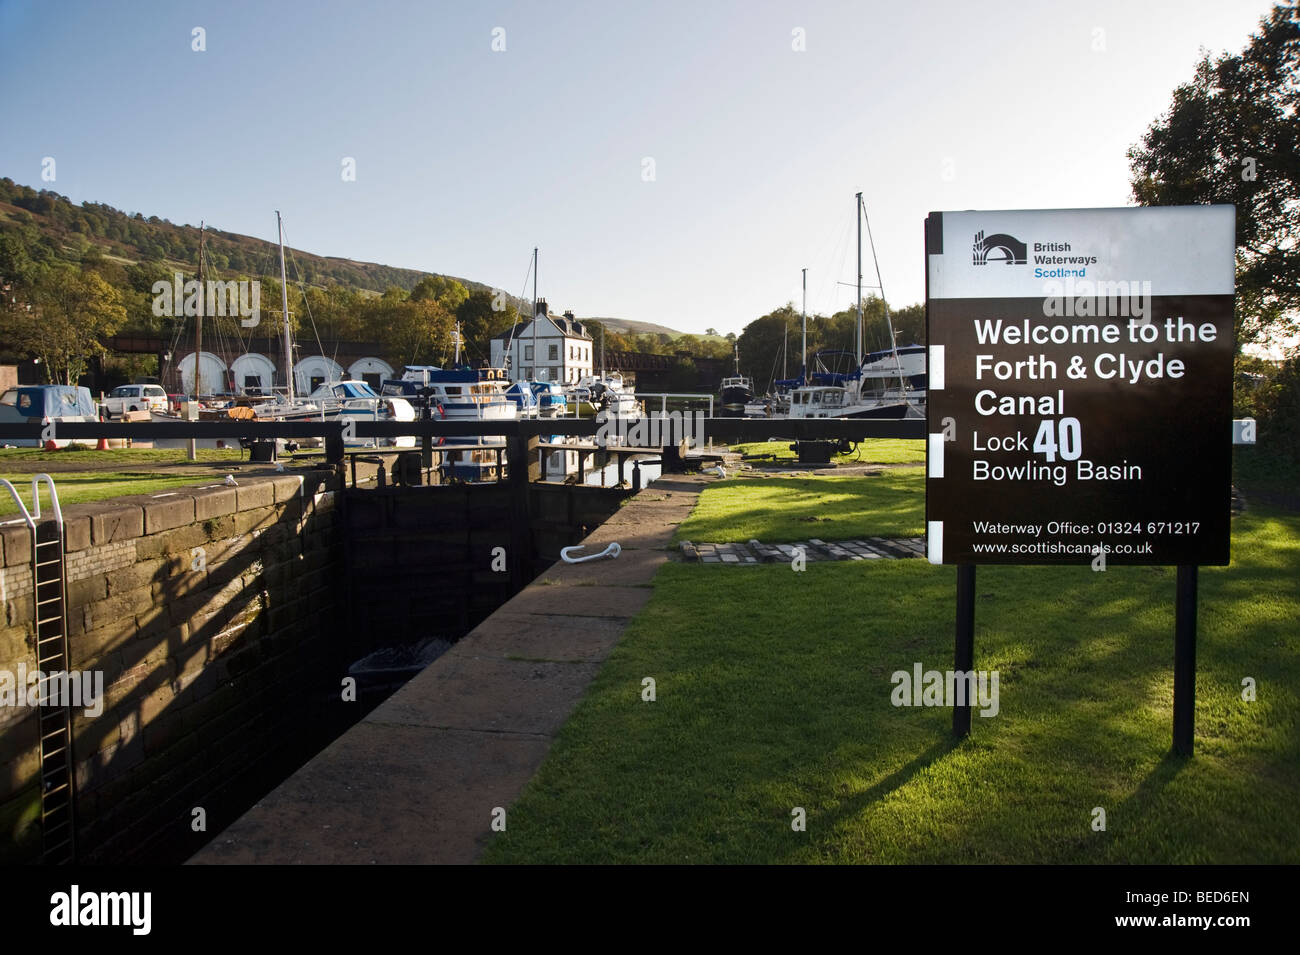 Bowling Basin which lies at the western end of the Forth & Clyde canal, and is open to the River Clyde, Glasgow, Scotland, UK Stock Photo